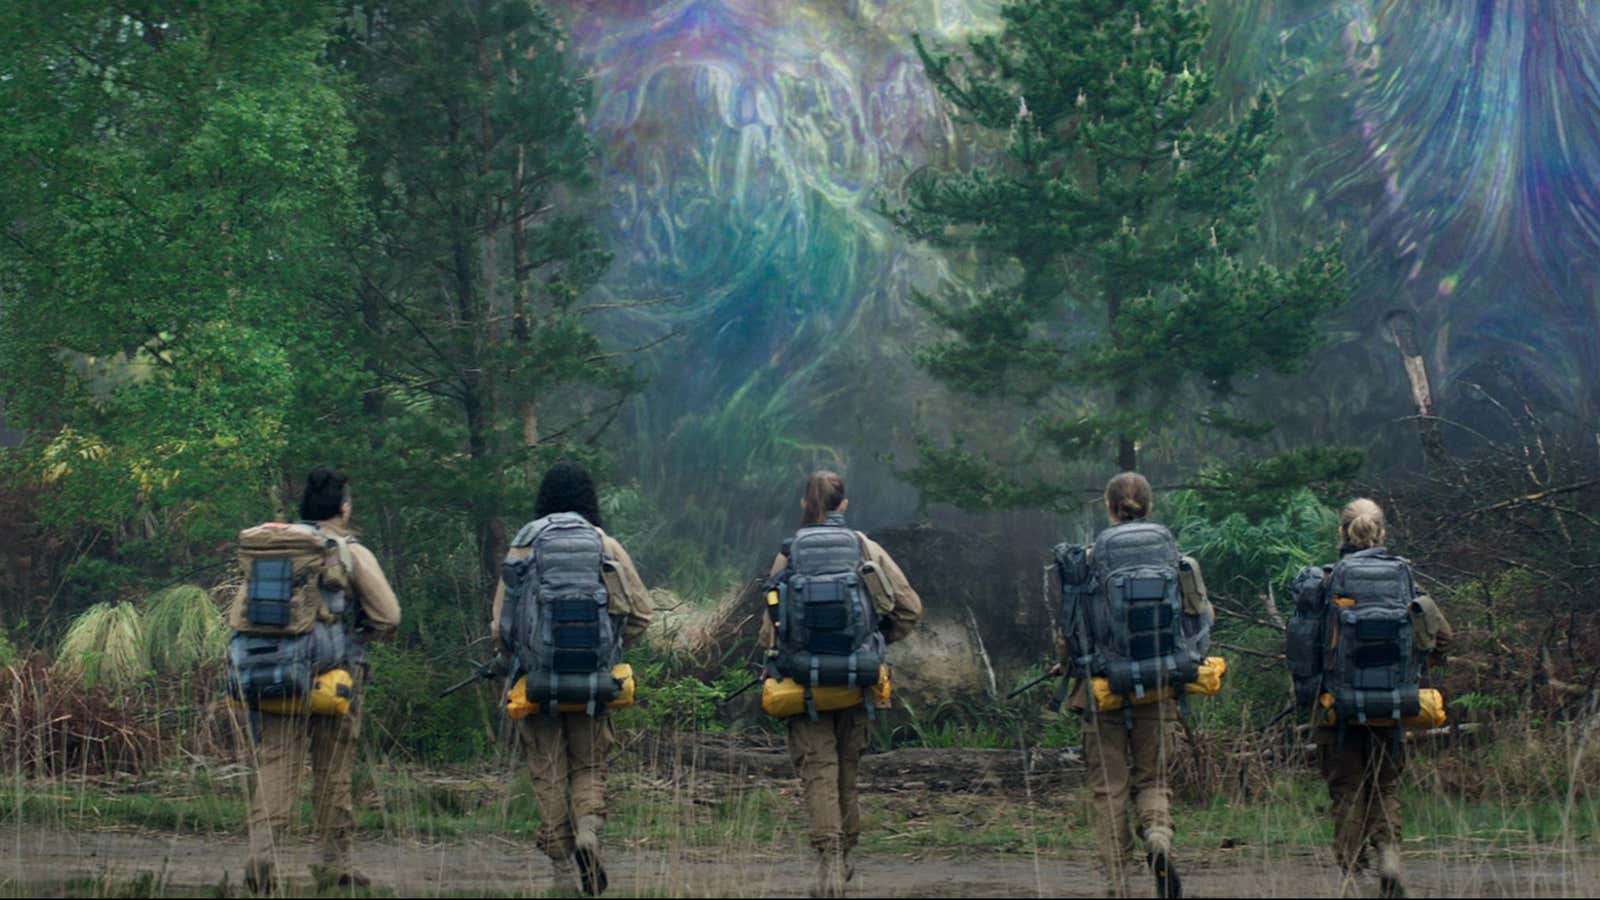 “Annihilation” confronts the radical otherness of nature itself.